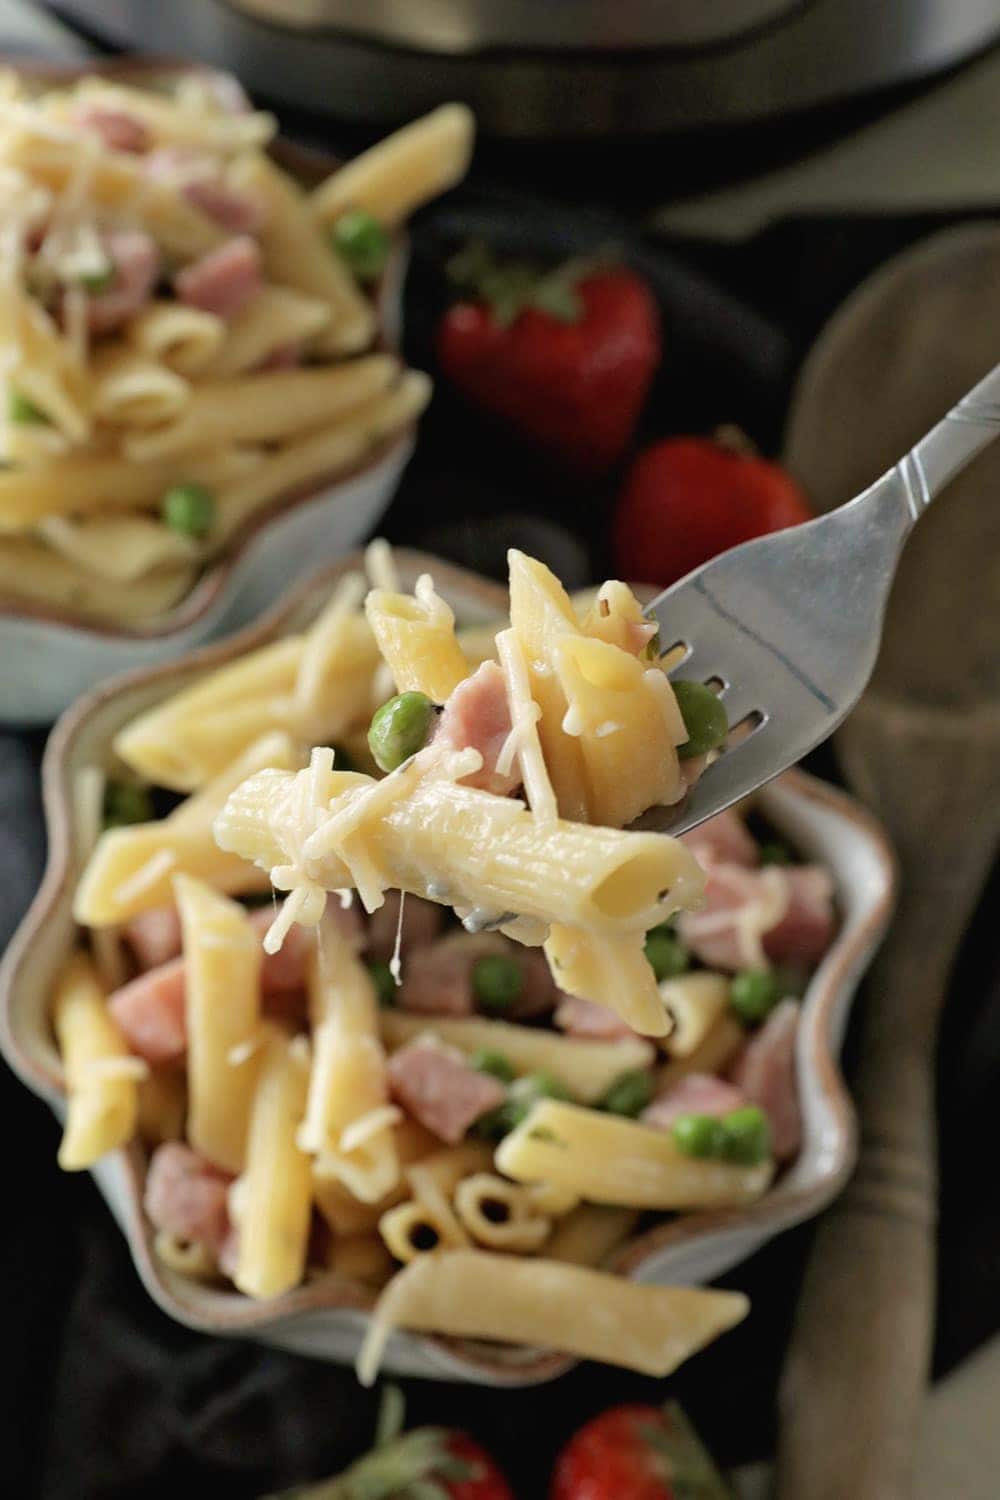 Instant Pot {Pressure Cooker} Ham & Penne Pasta ~ Our Favorite Meal Now in the Instant Pot! Only One Dish to Clean and You Have an Easy Dinner Recipe!